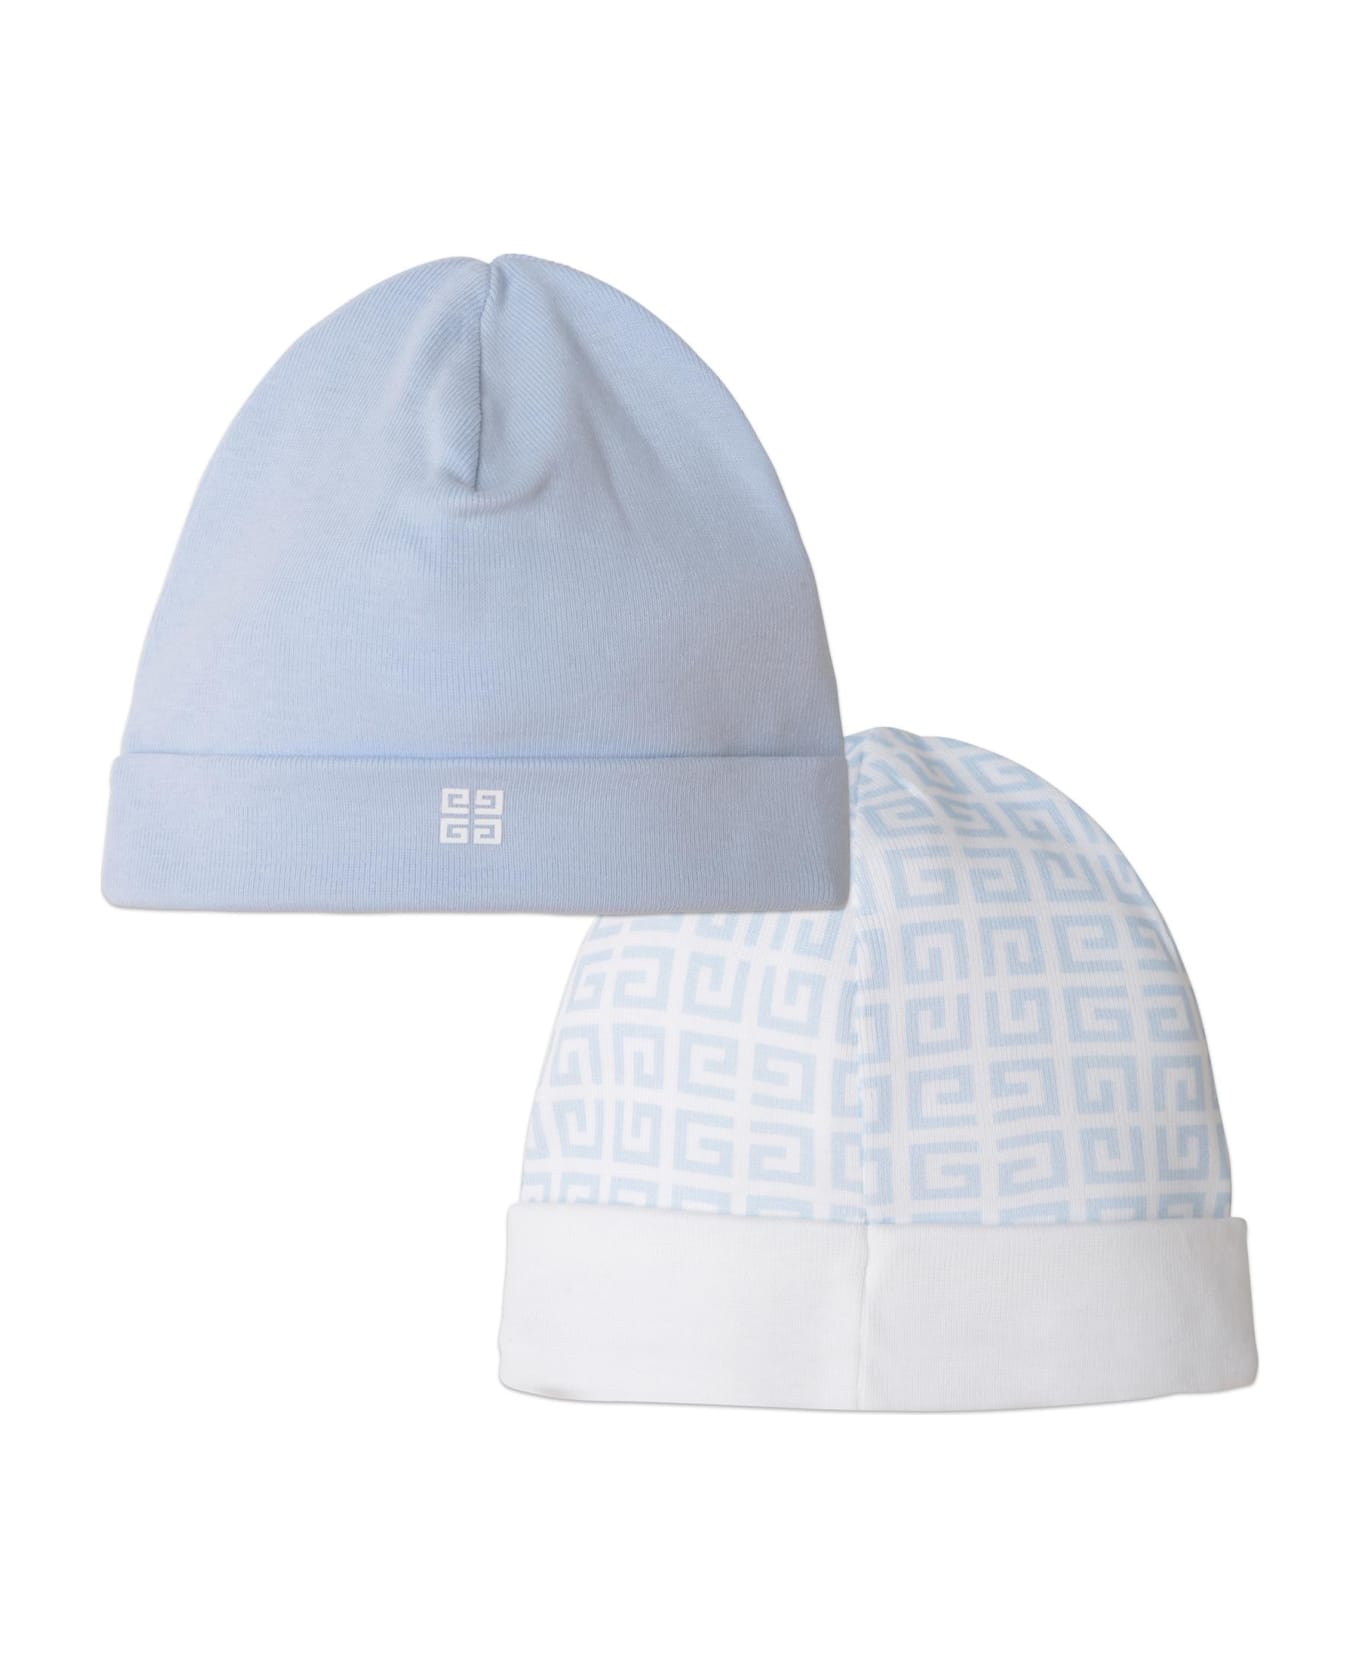 Givenchy Beanies With Print - Light blue